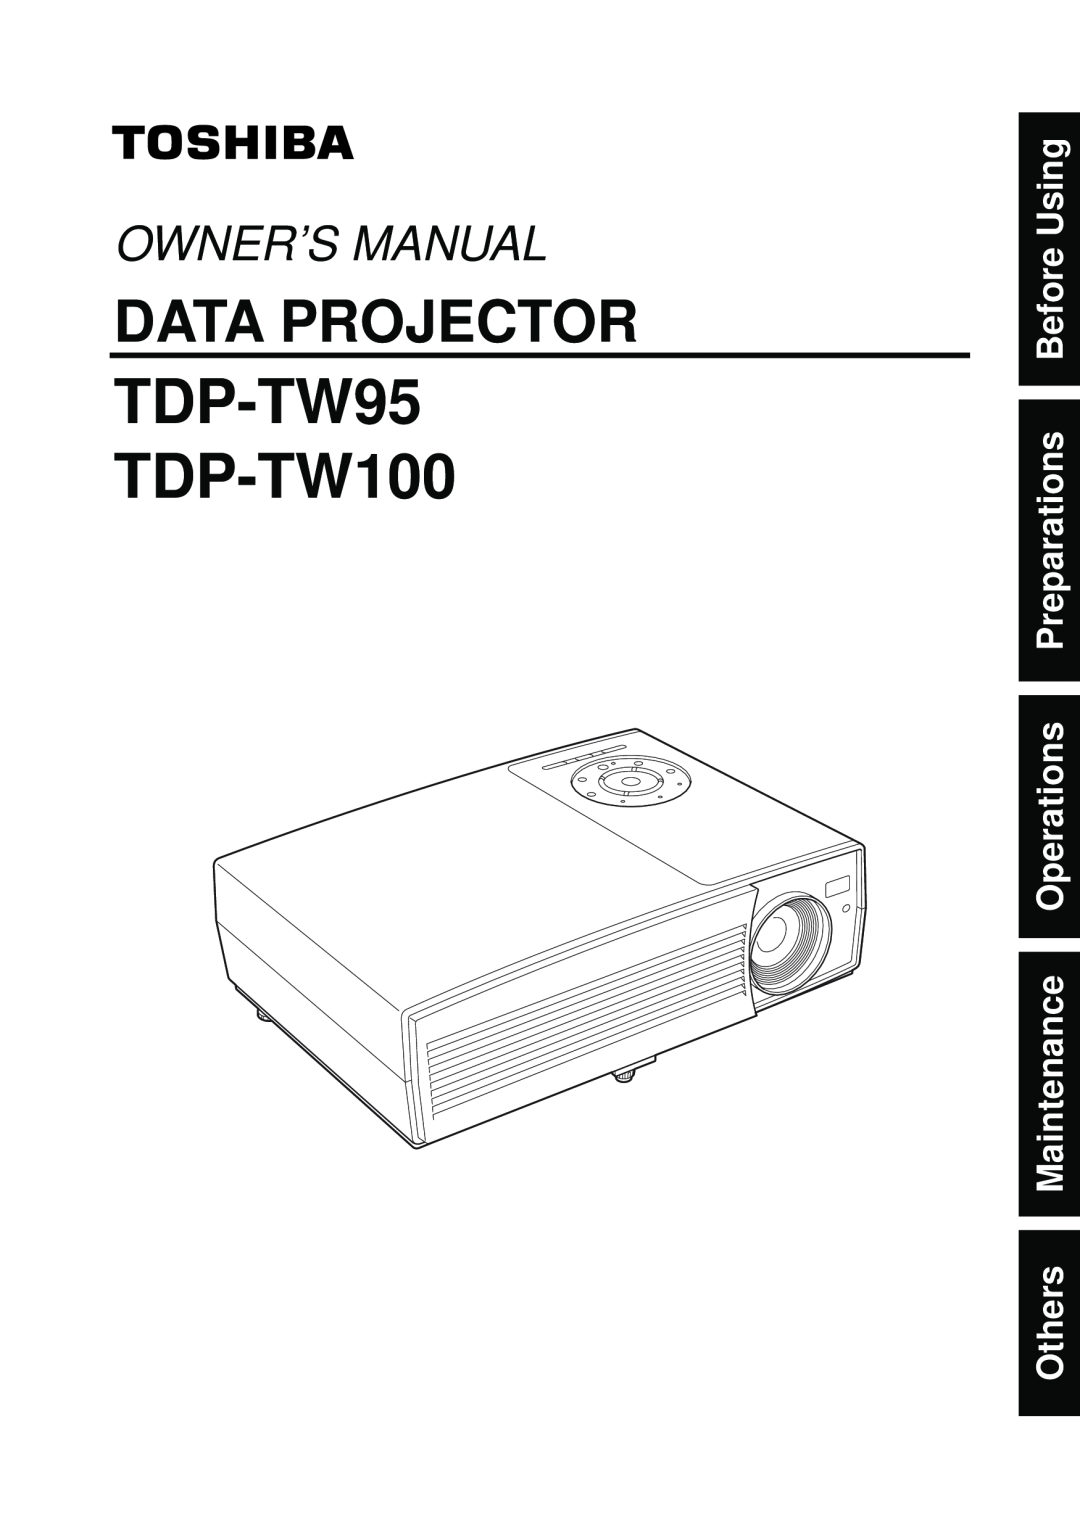 Toshiba owner manual Others Maintenance Operations Preparations Before Using, TDP-TW95 TDP-TW100, Data Projector 